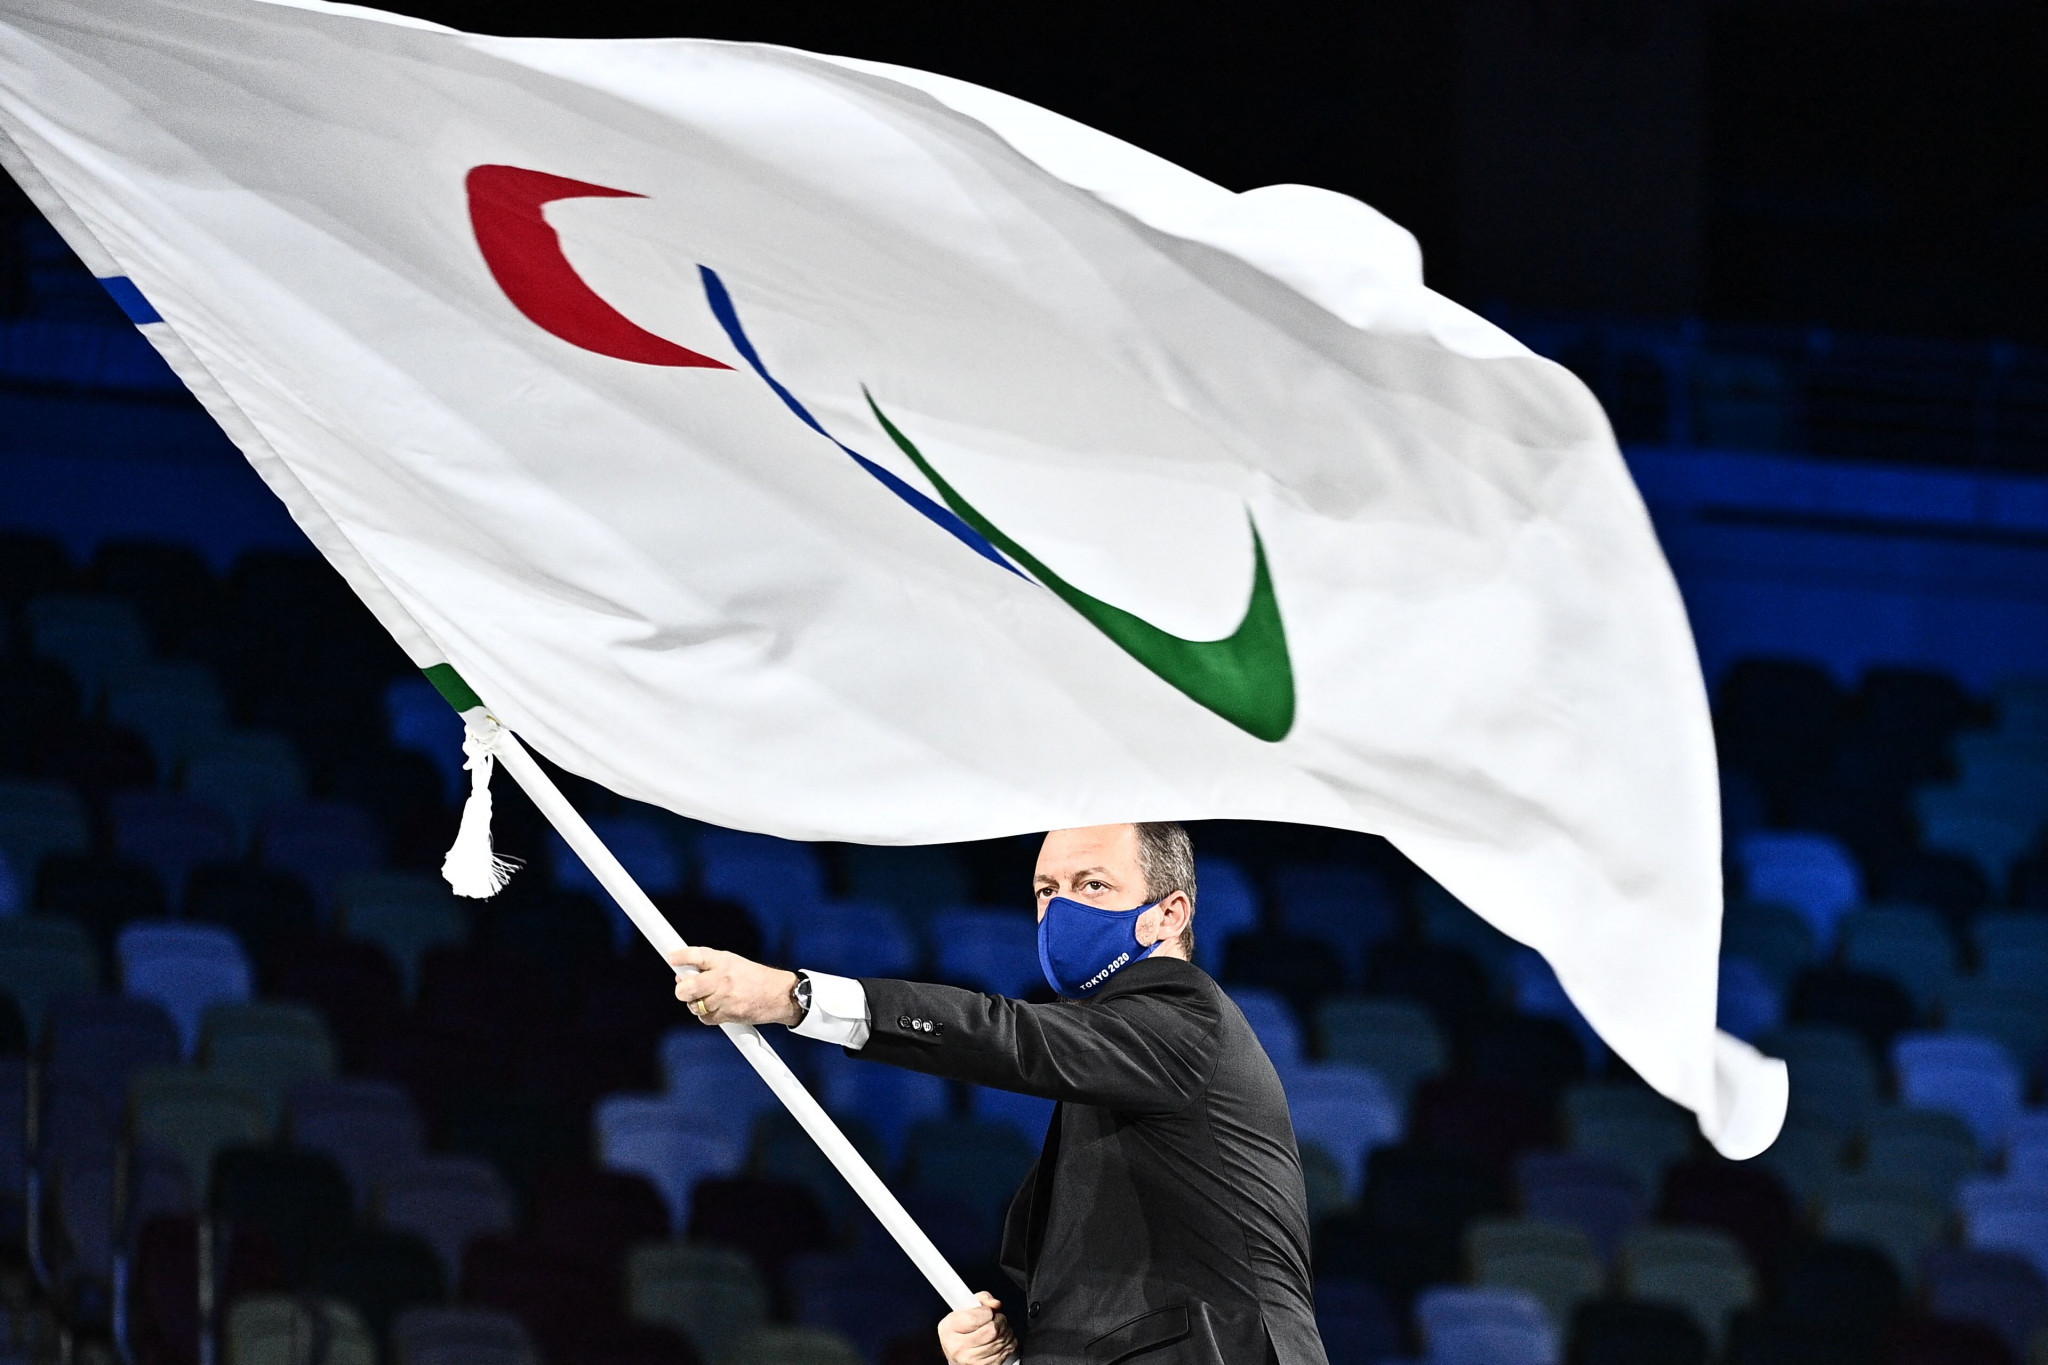 International Paralympic Committee President Andrew Parsons has insisted that Japan was proud to stage the Paralympics ©Getty Images